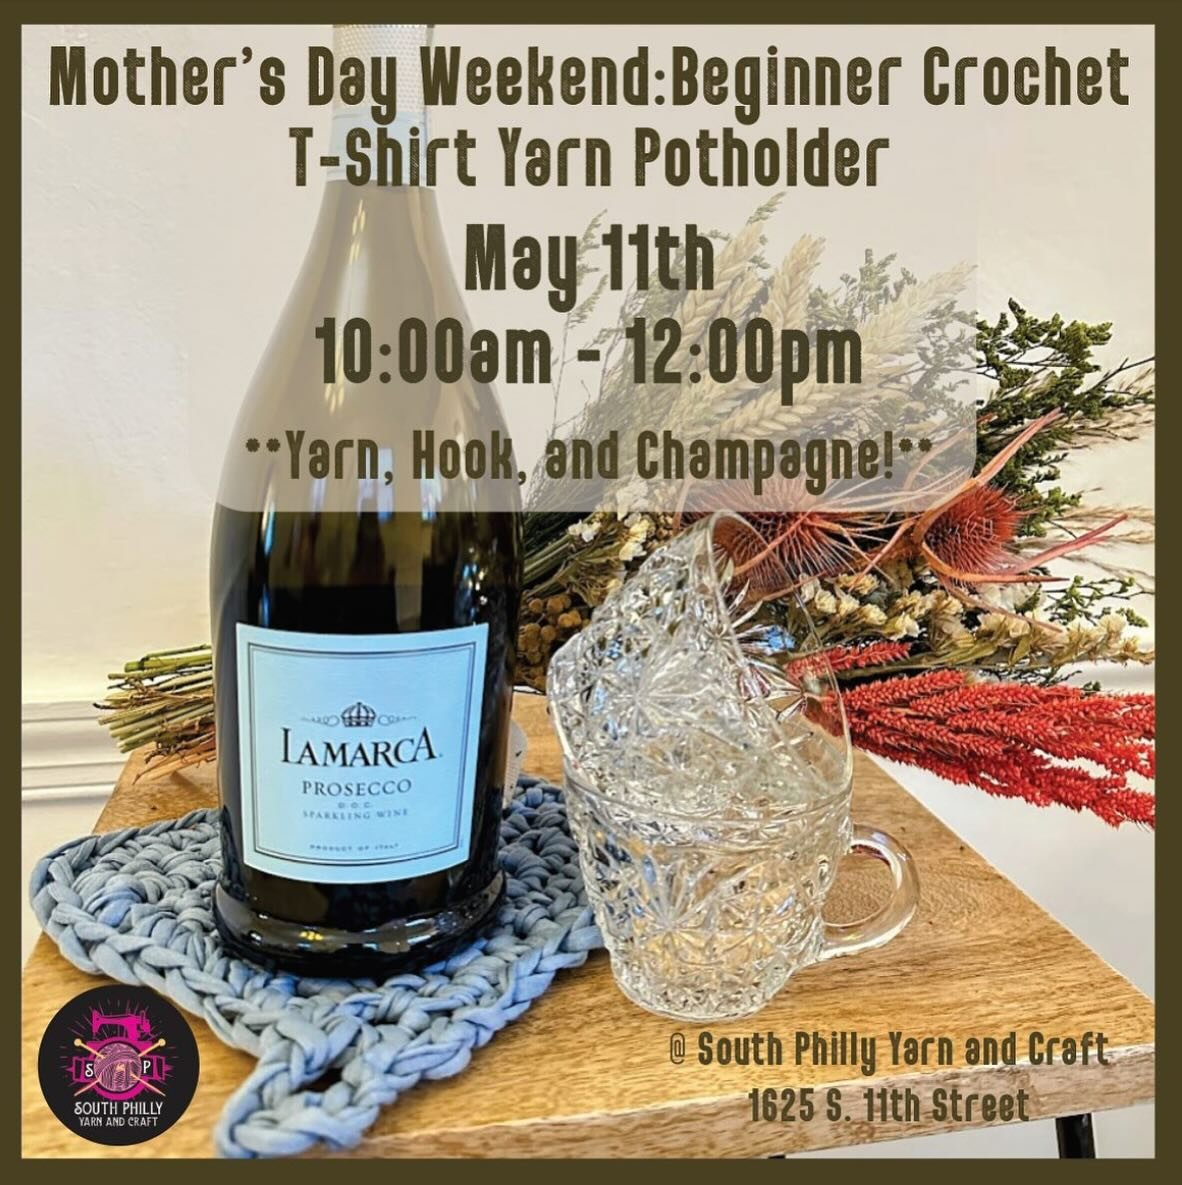 Mother&rsquo;s Day Weekend!

On May 11th, we have beginner crochet class + mimosas! 

On May 12th, we kick off a new series of sock knitting color-work sessions!

Details are in linktree or the website.

*Let&rsquo;s make something together!*

🩷🧶🖤